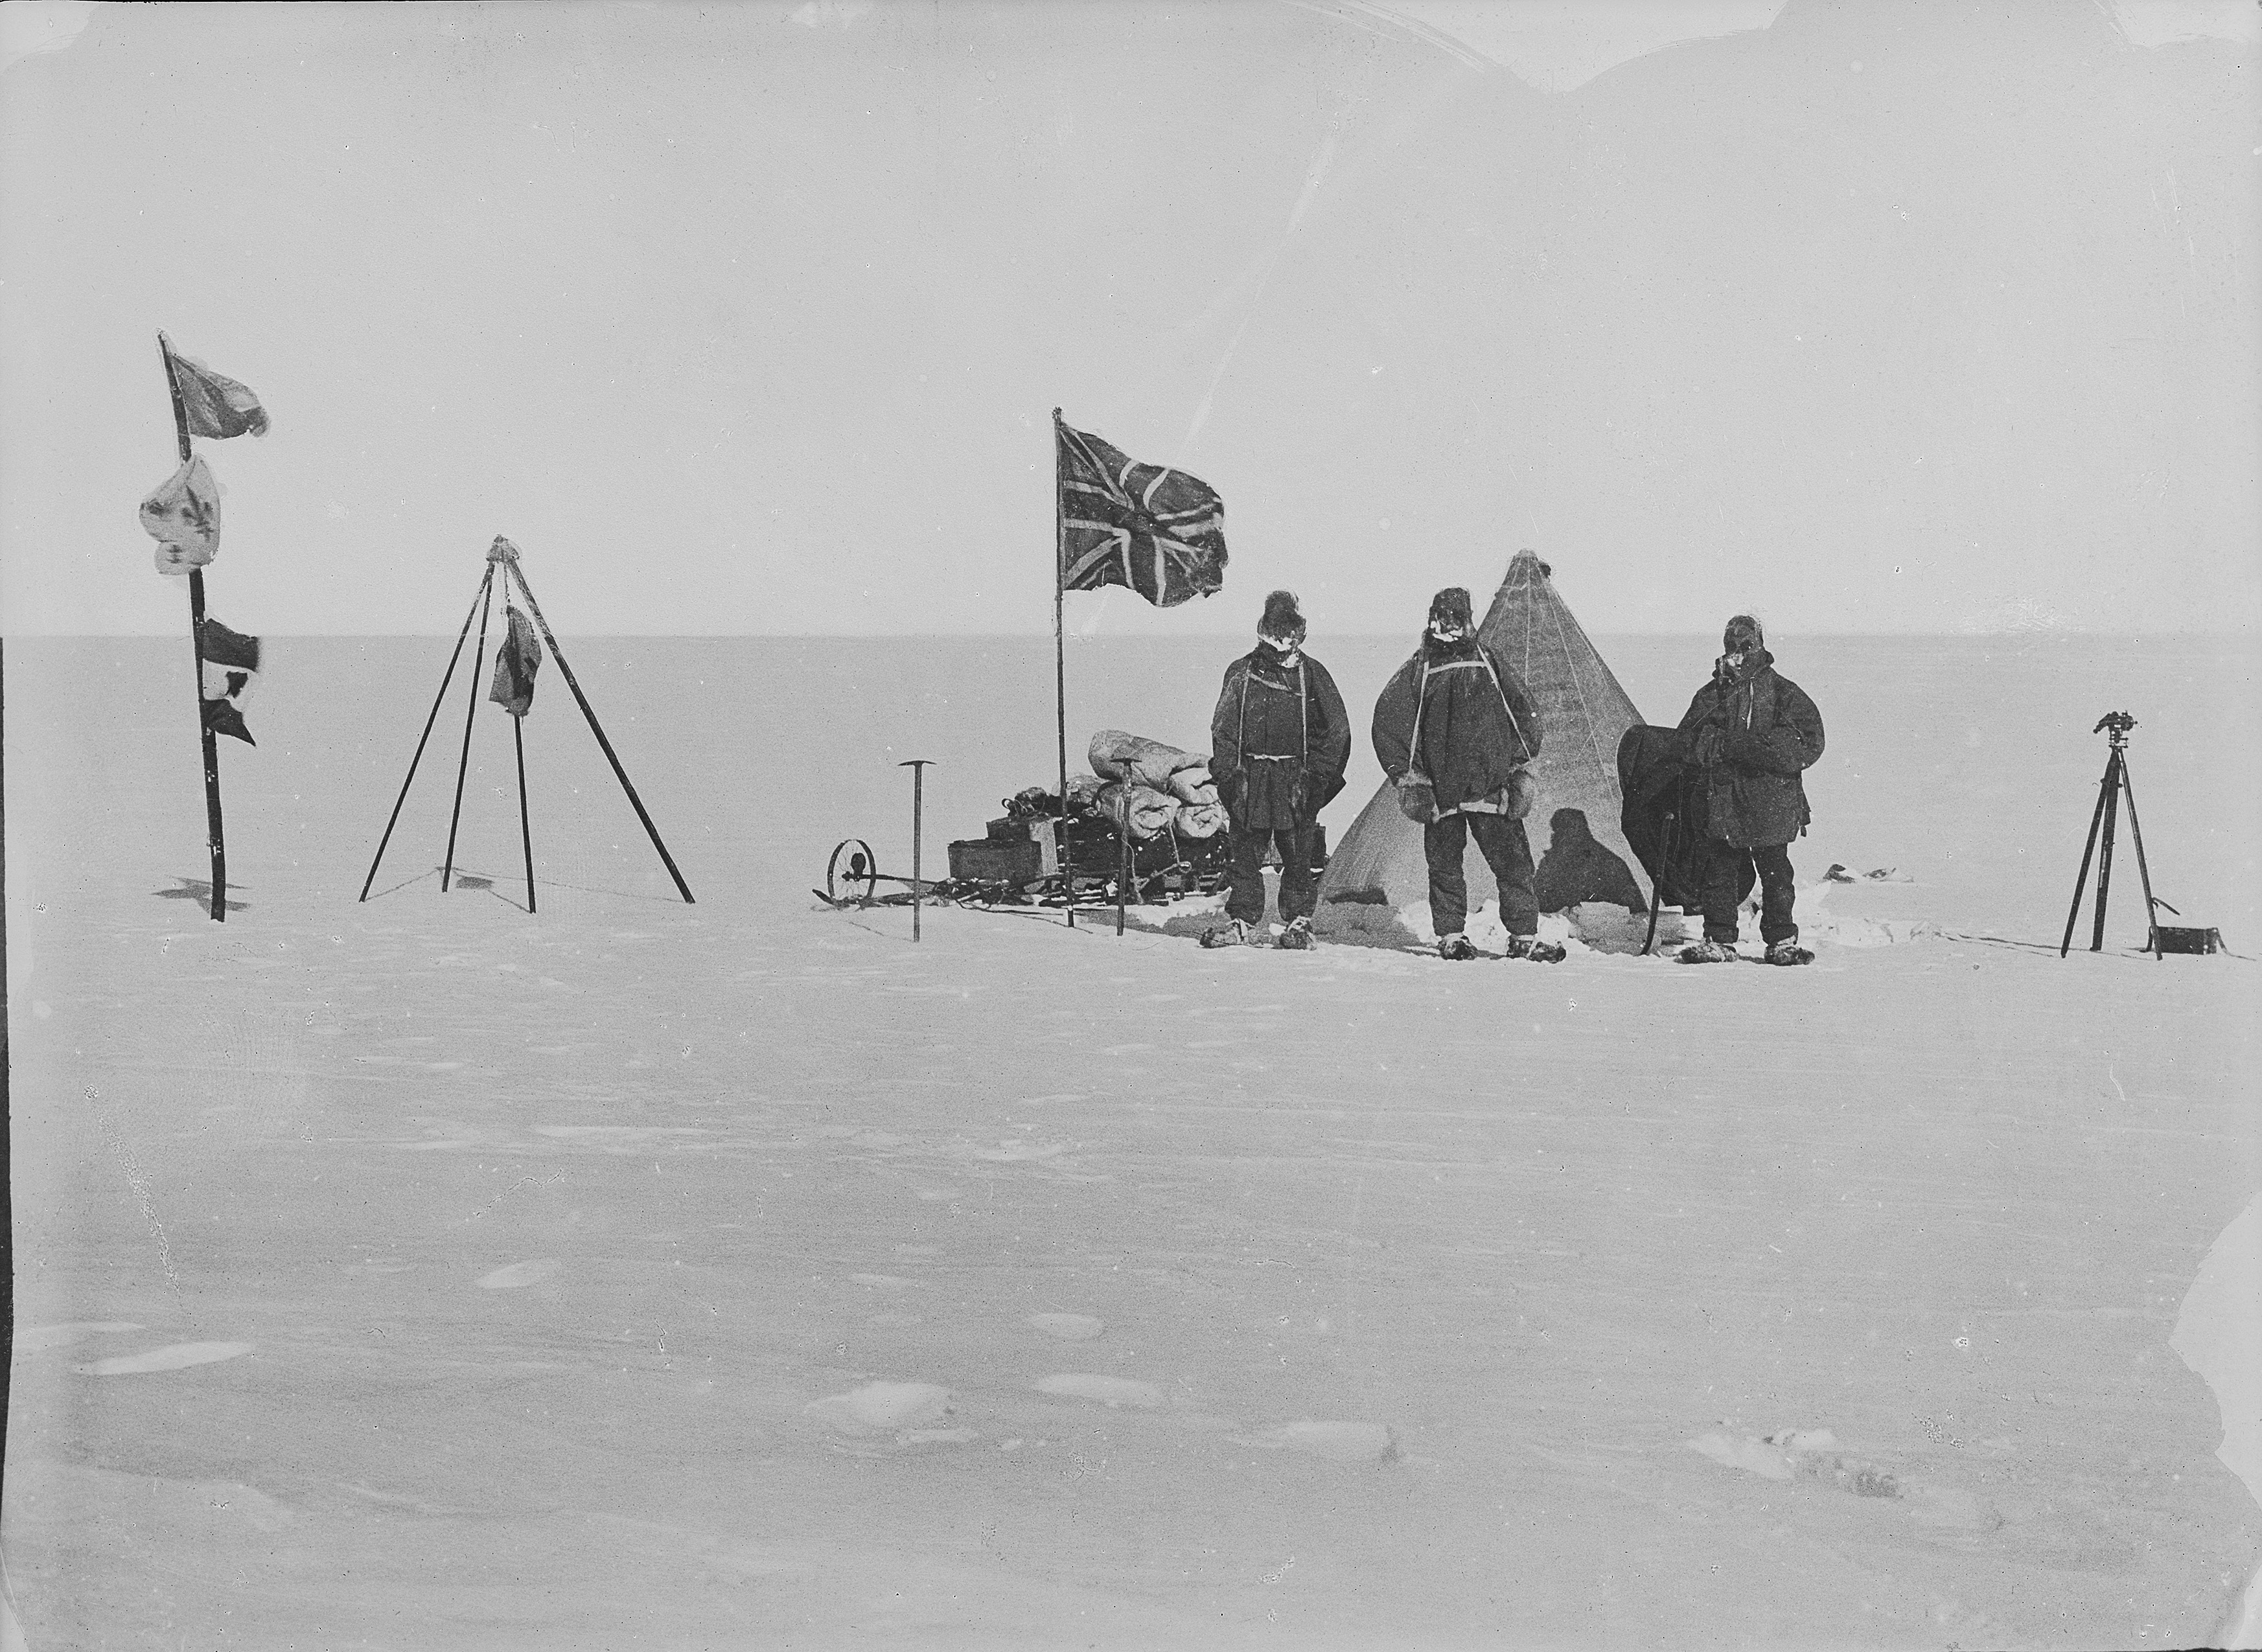 The Christmas camp on the plateau. (Scott Polar Research Institute, University of Cambridge/ PA)